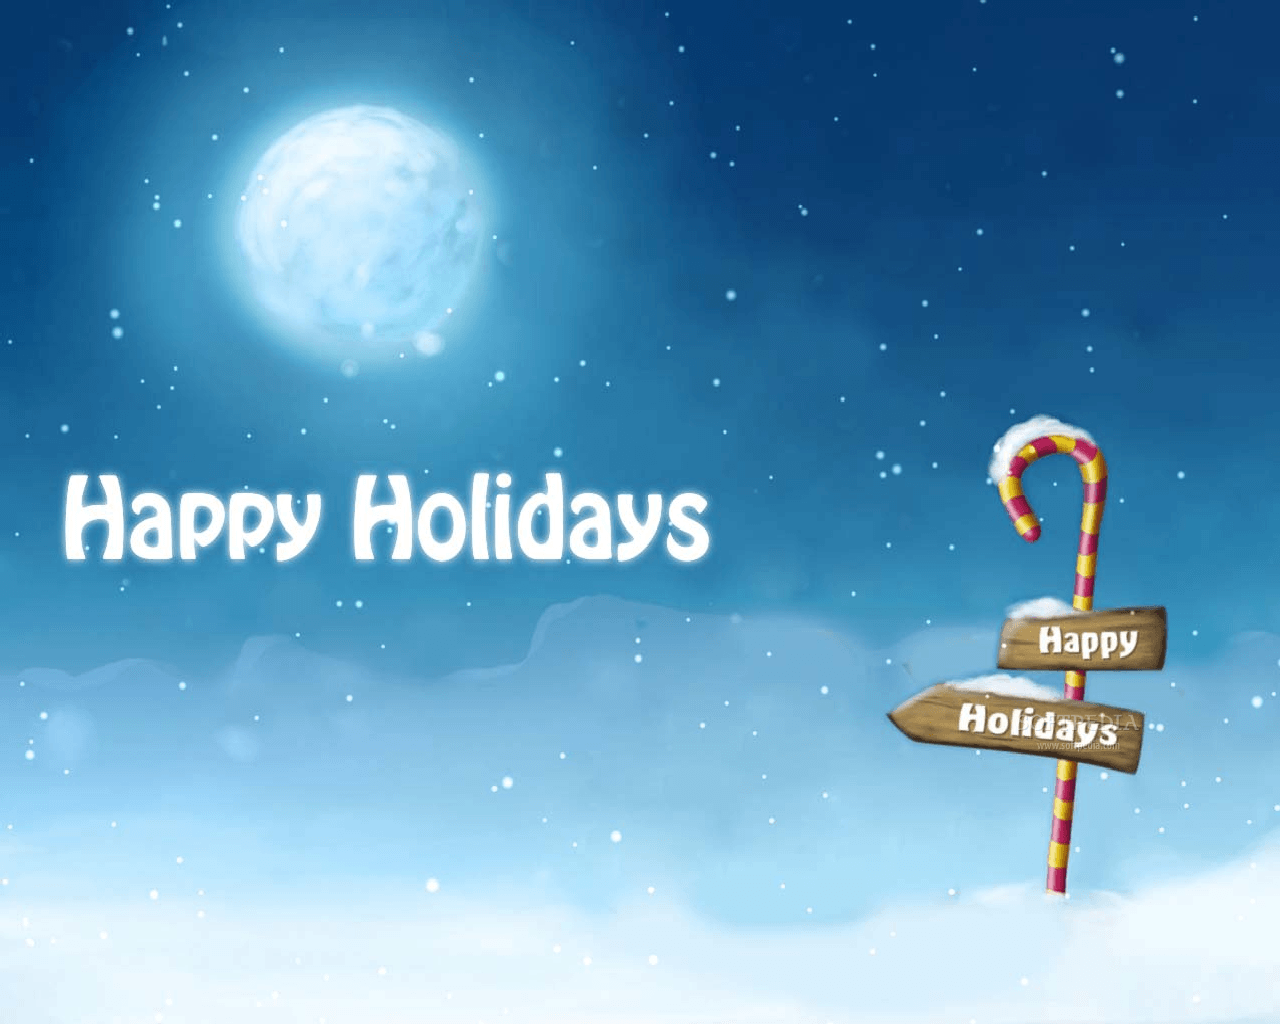 Happy Holidays Picture HD Cool 7 HD Wallpapercom